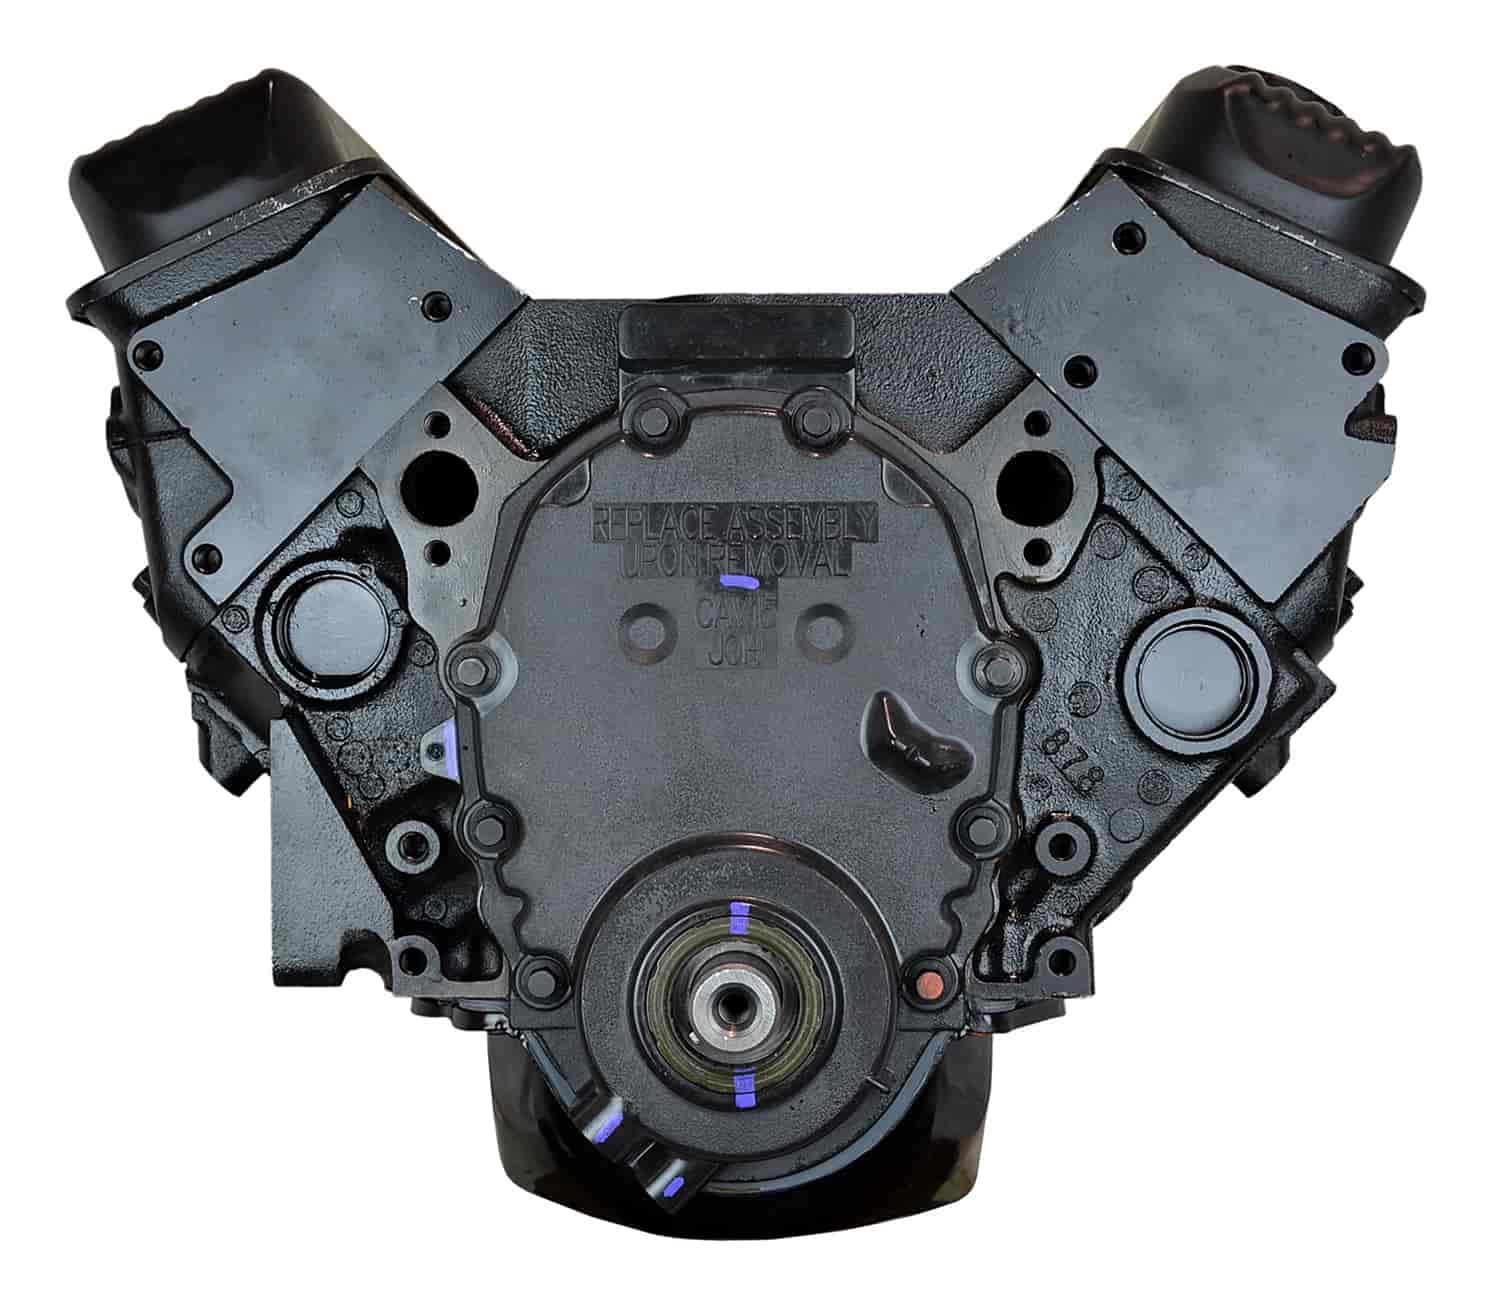 Remanufactured Crate Engine for 2000-2002 Chevy & GMC C/K Truck, SUV, & Van with 350ci/5.7L V8